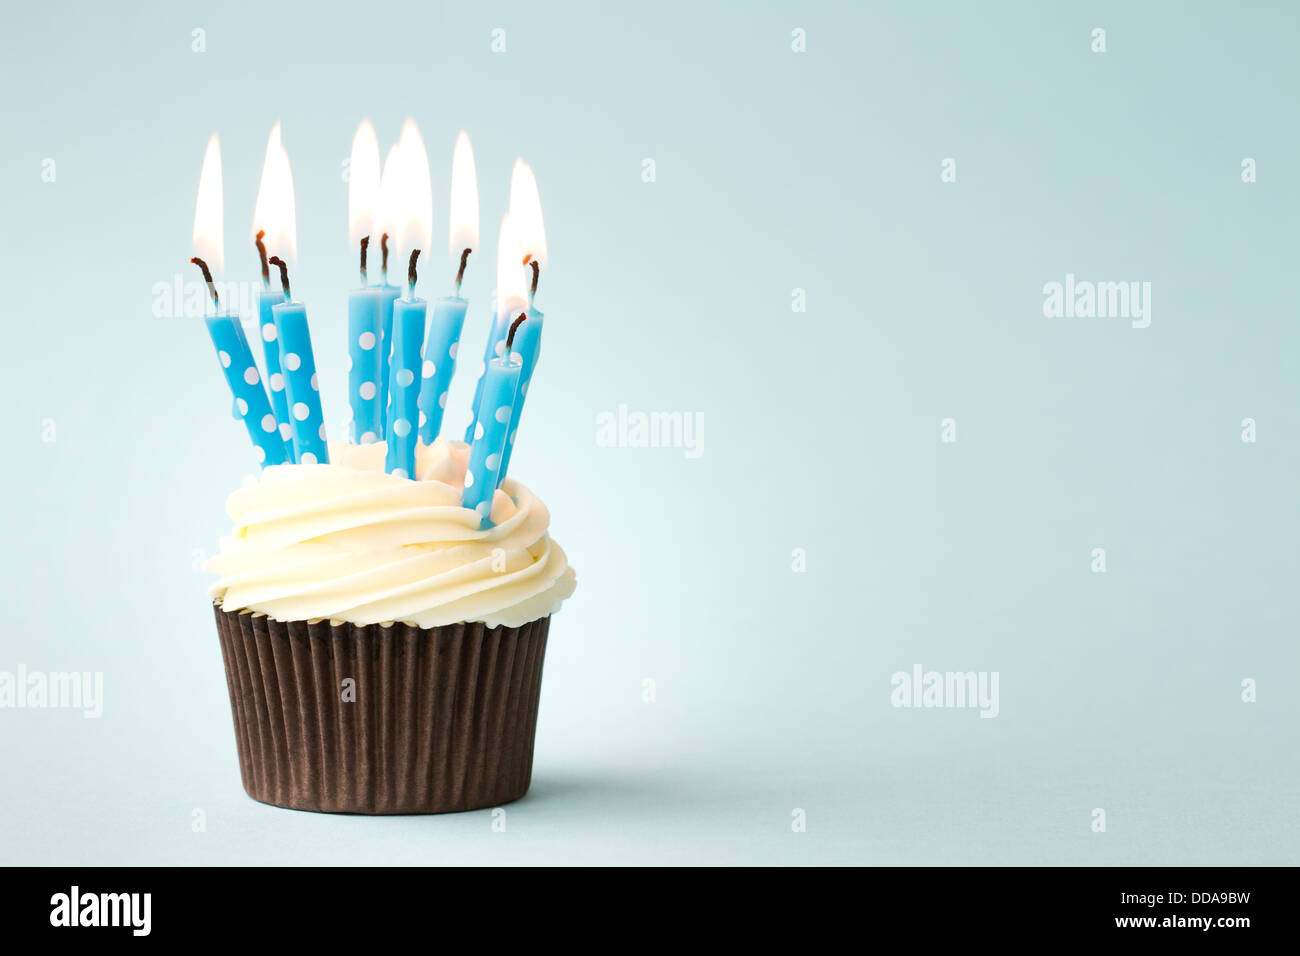 Cupcake decorated with birthday candles Stock Photo